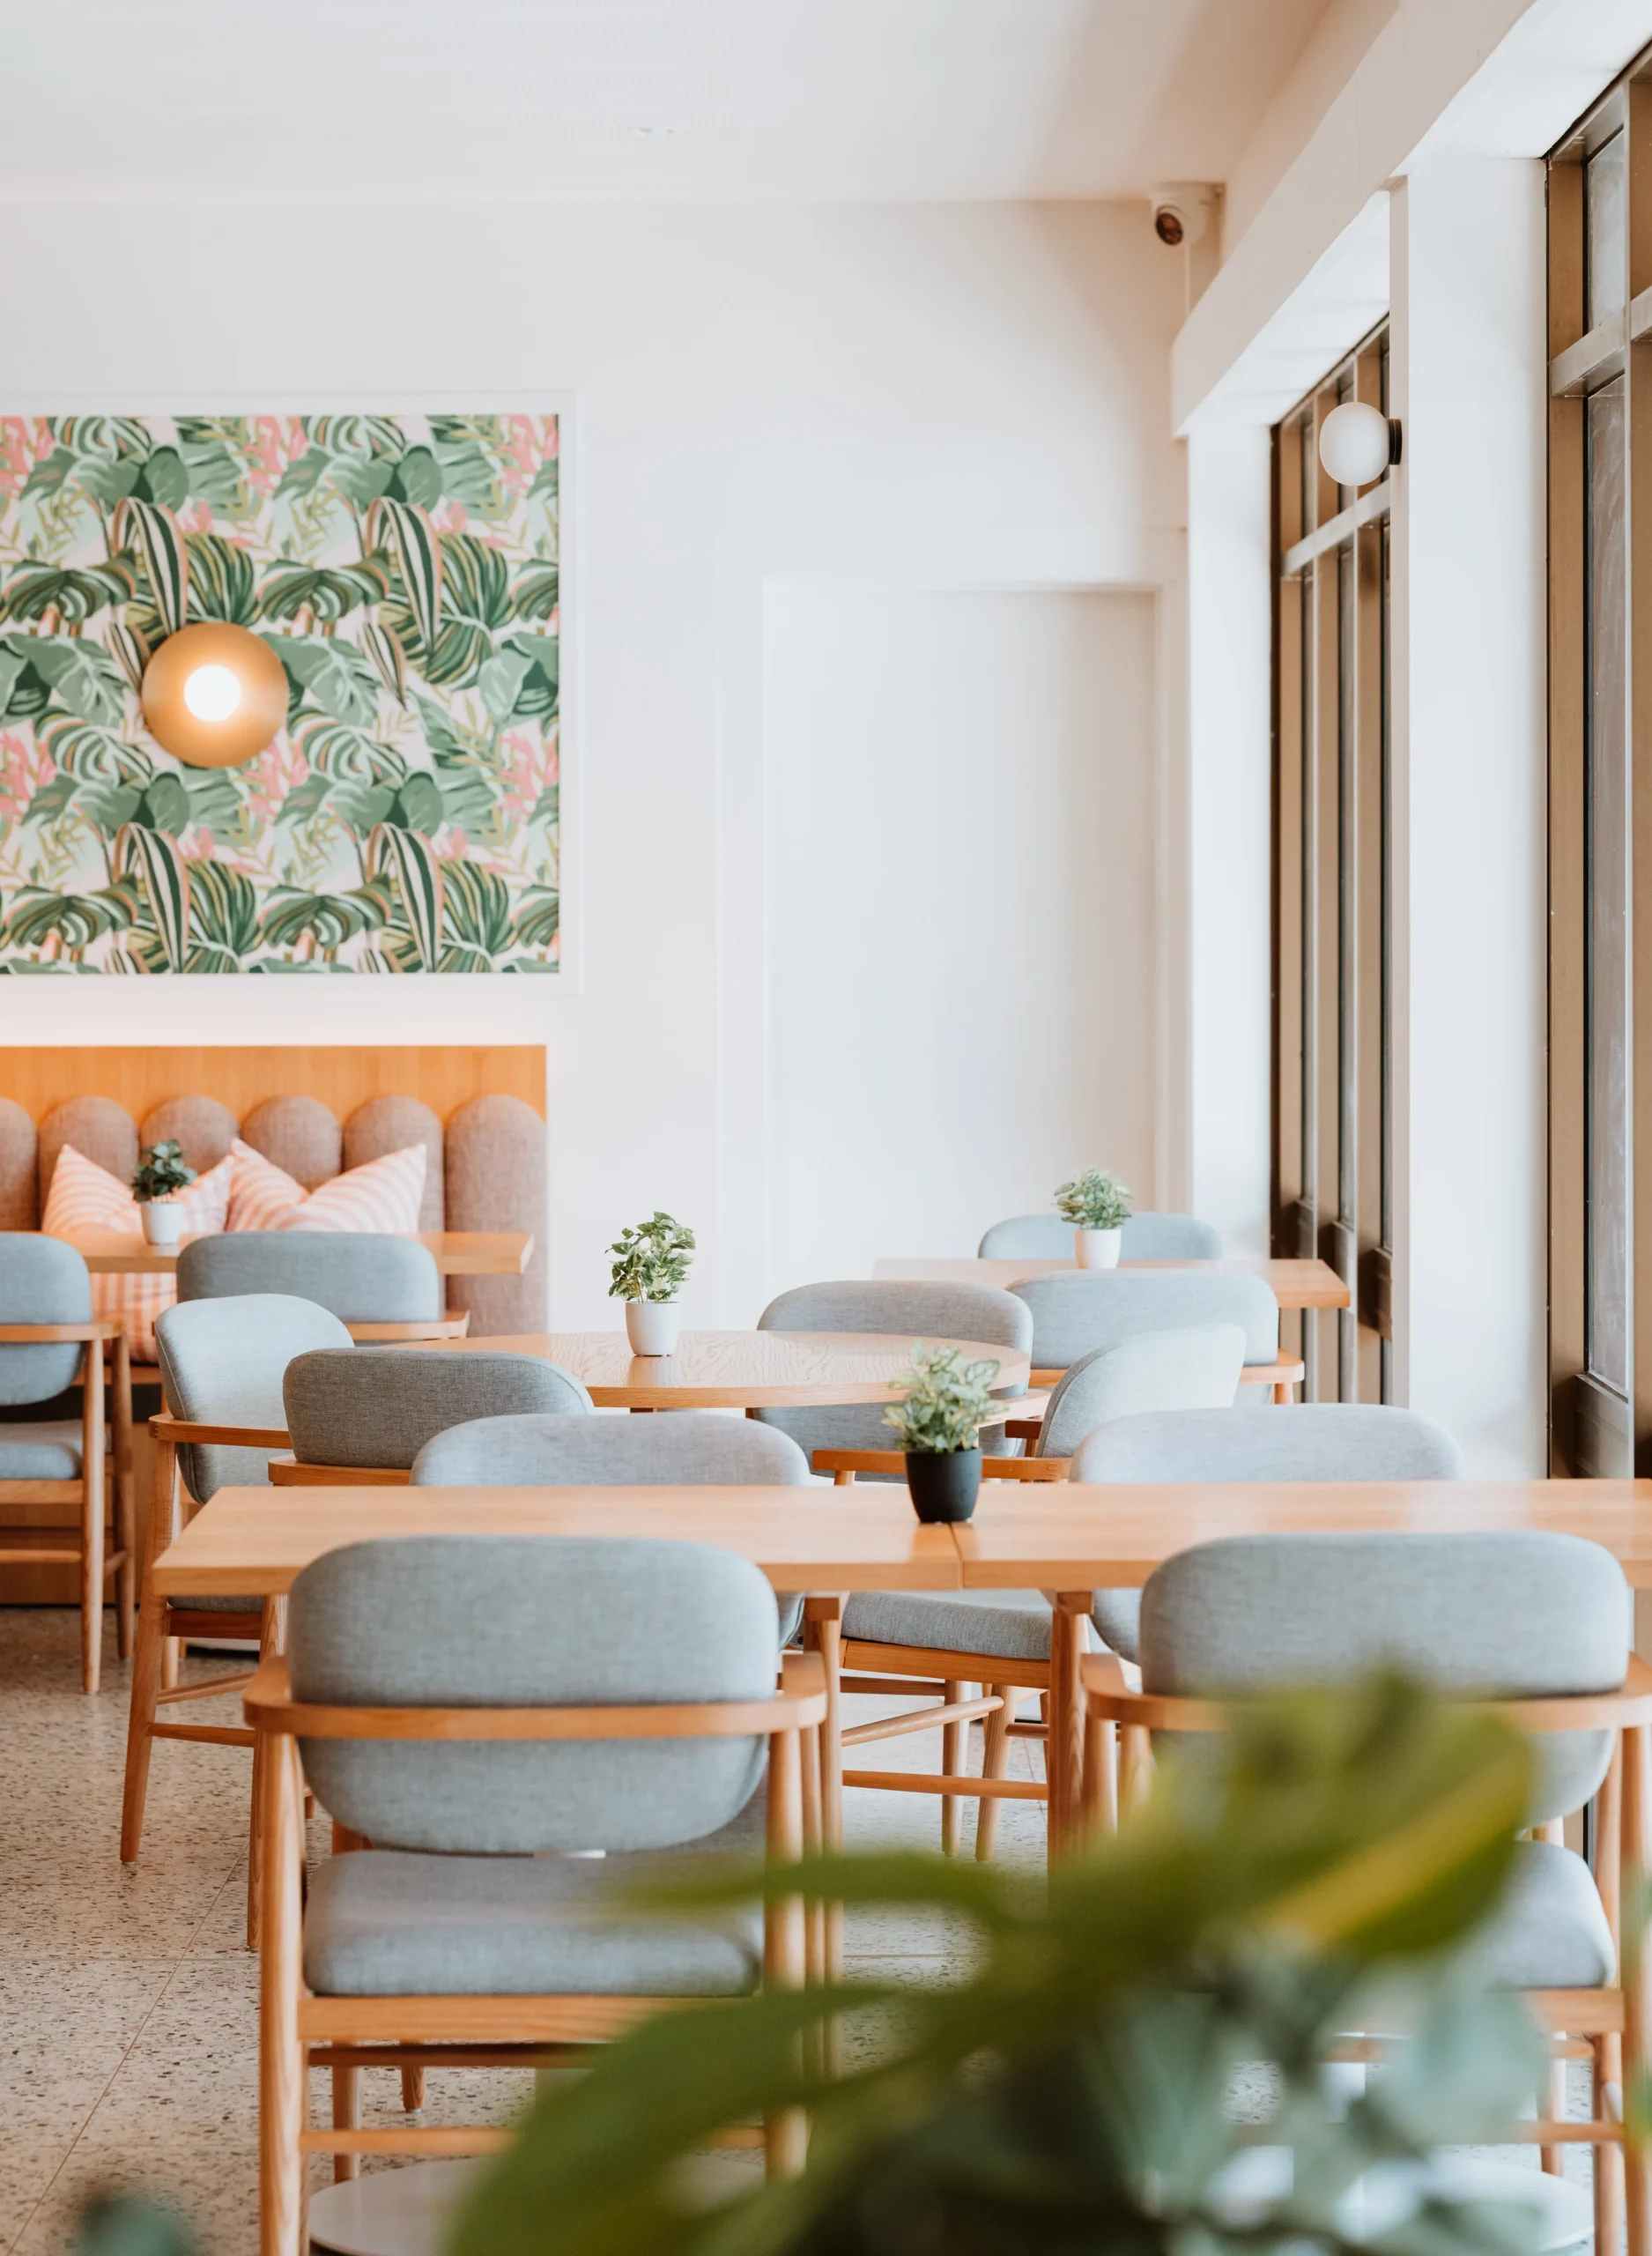 Interior dining at the Hedland Hotel with light and tropical decor